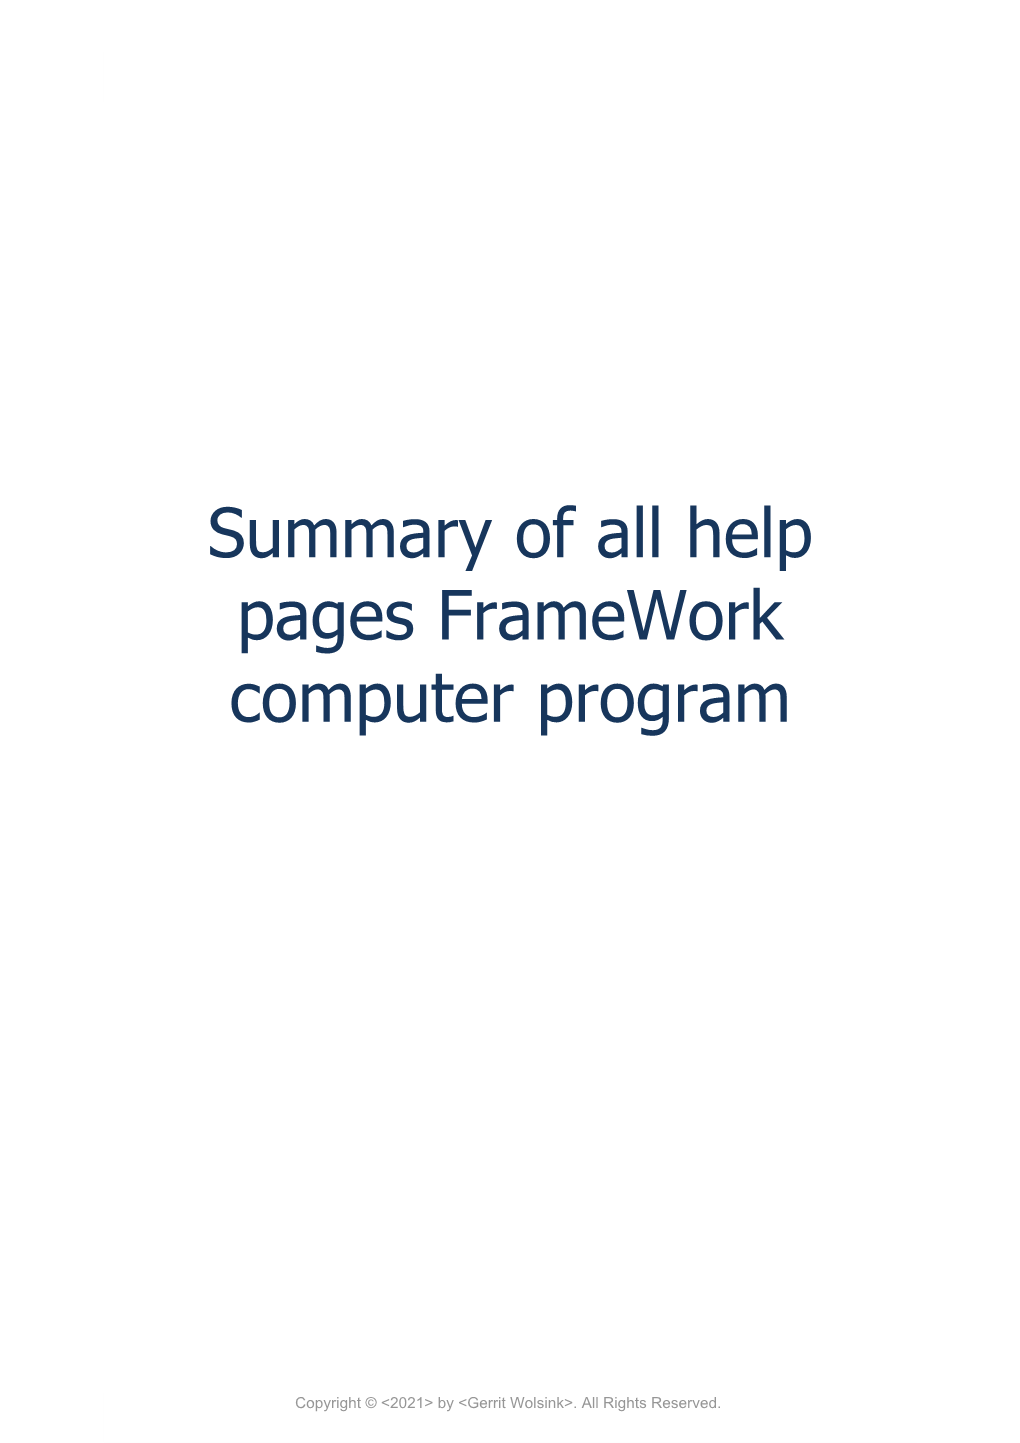 Summary of All Help Pages Framework Computer Program